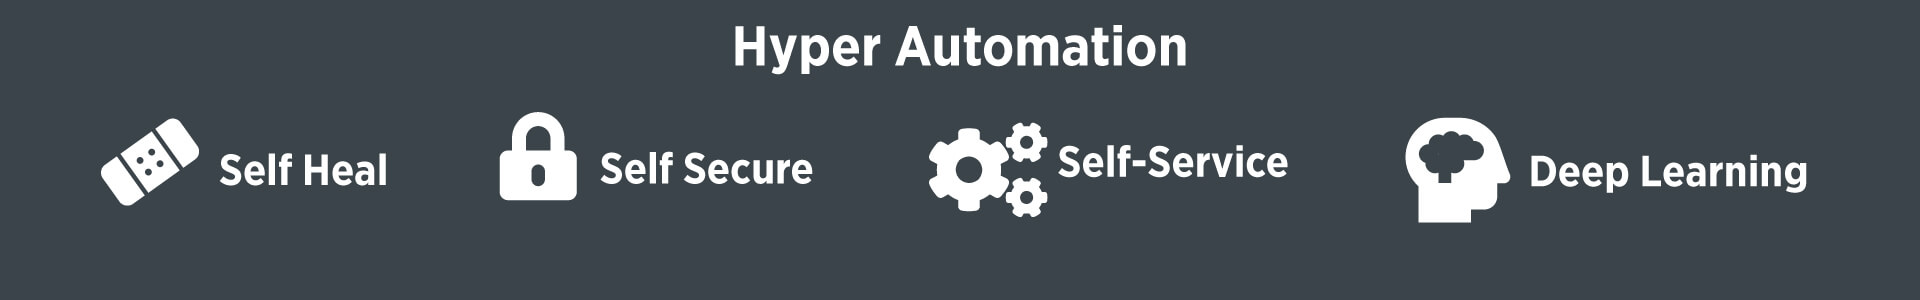 Hyper Automation — Self Heal, Self Secure, Self-Service, Deep Learning